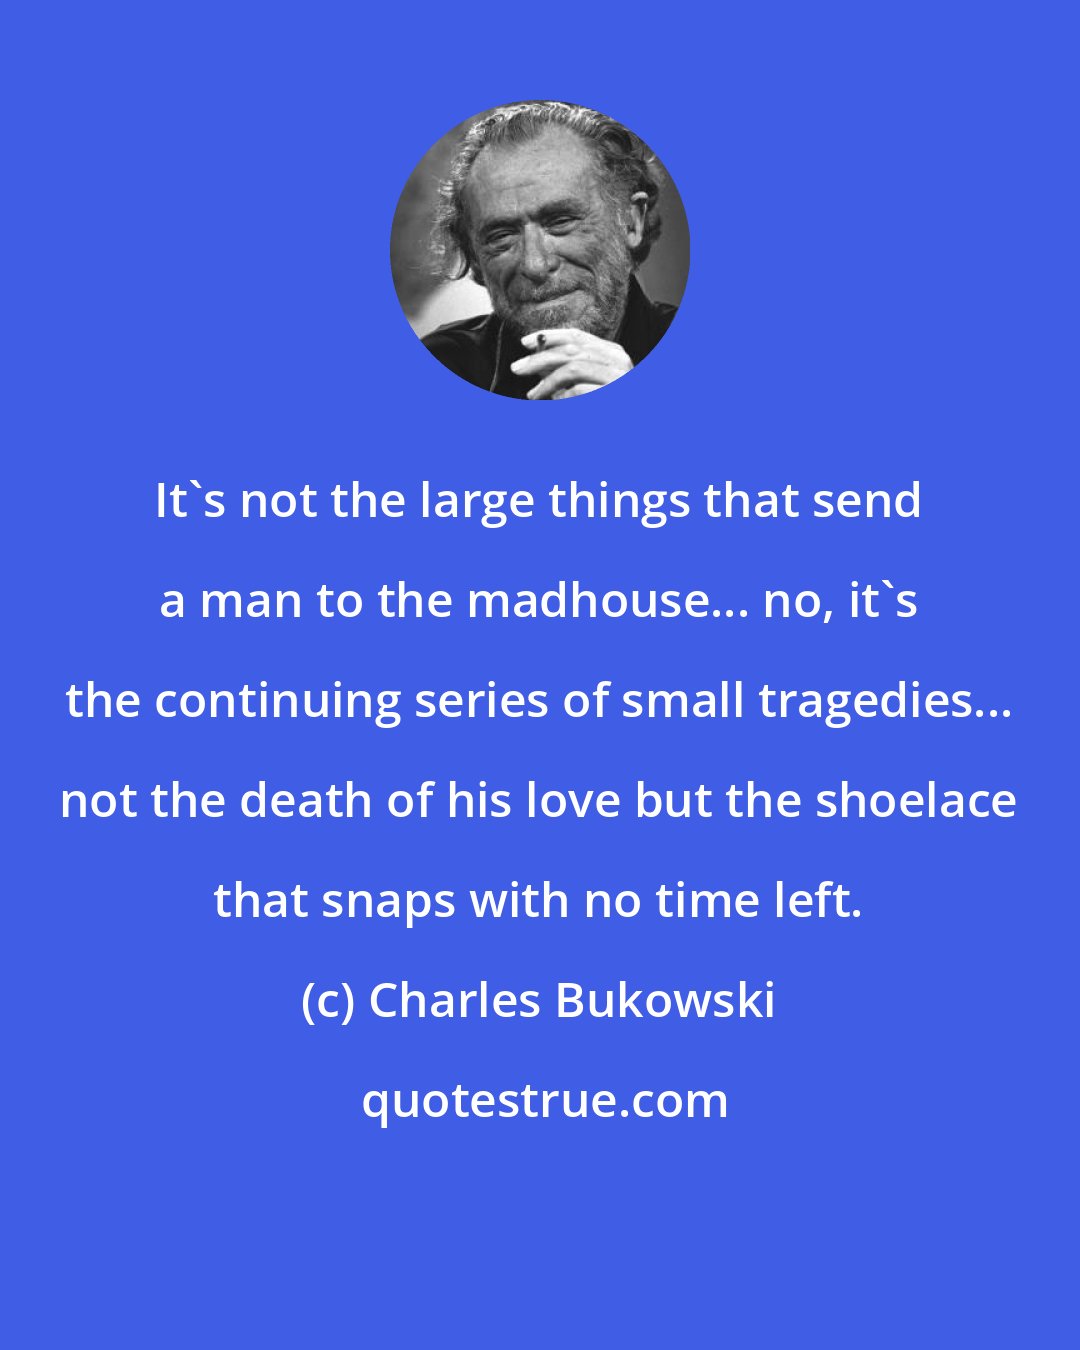 Charles Bukowski: It's not the large things that send a man to the madhouse... no, it's the continuing series of small tragedies... not the death of his love but the shoelace that snaps with no time left.